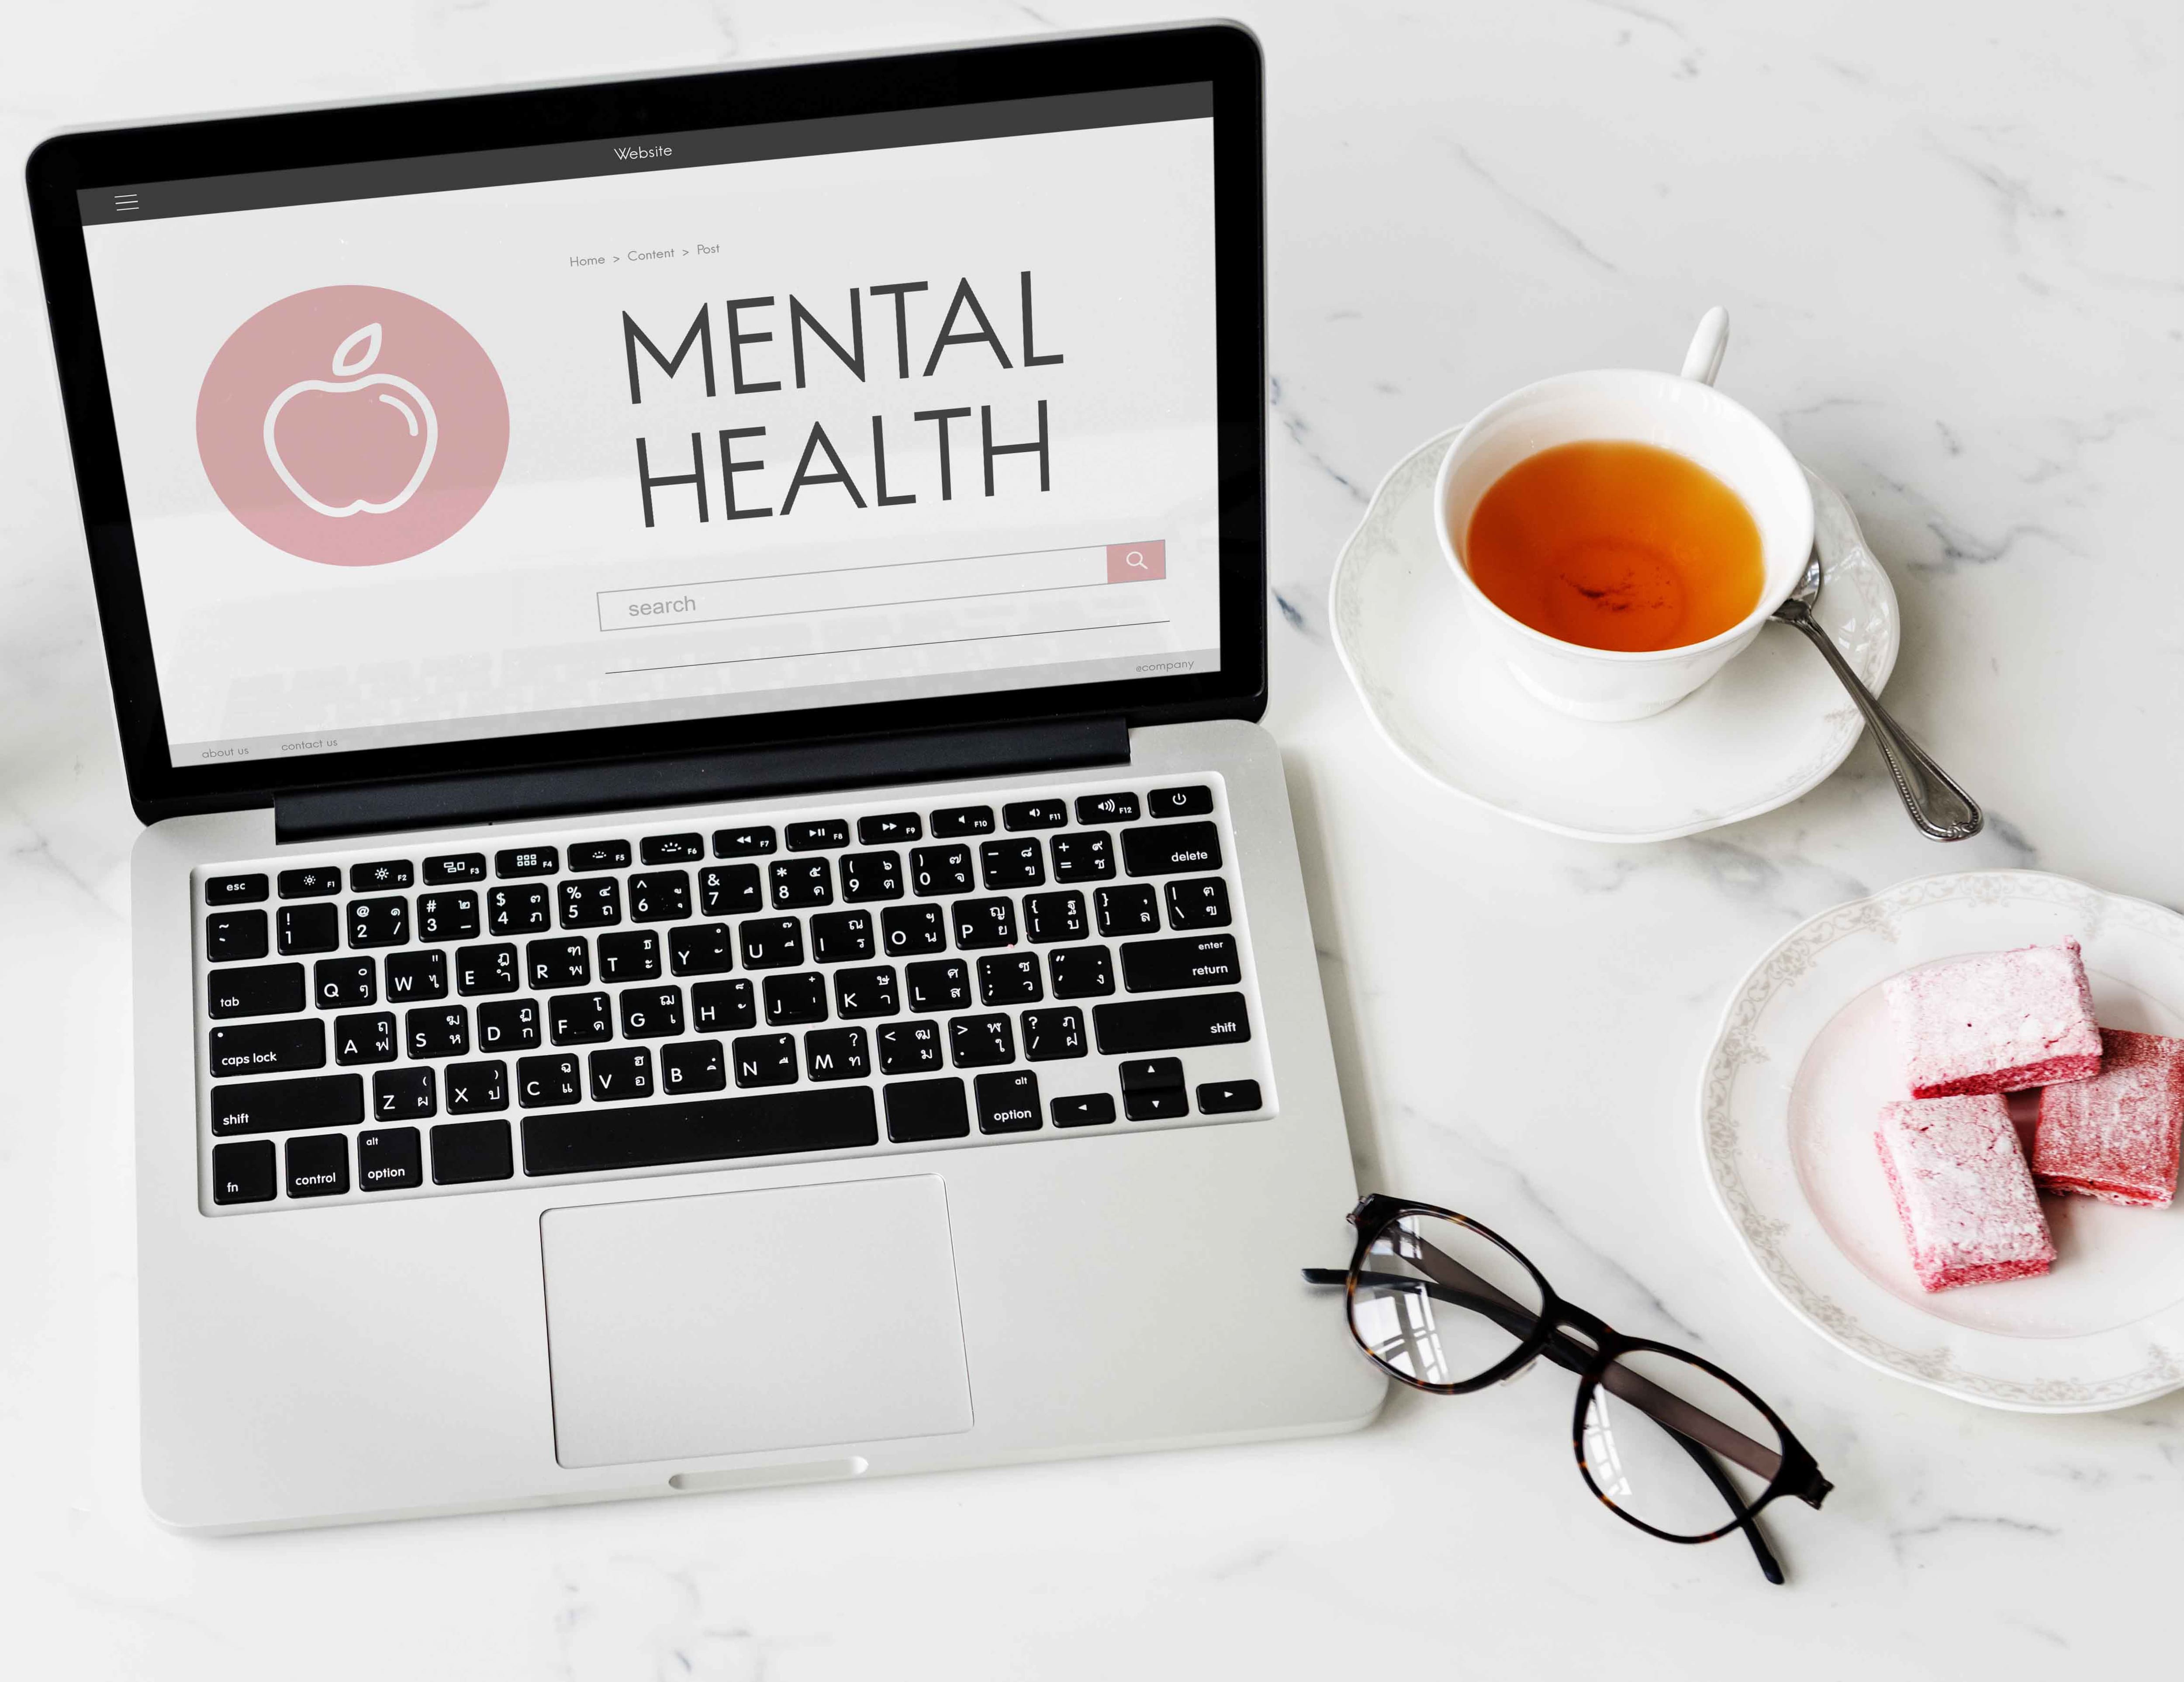 MENTAL HEALTH AND WELL BEING